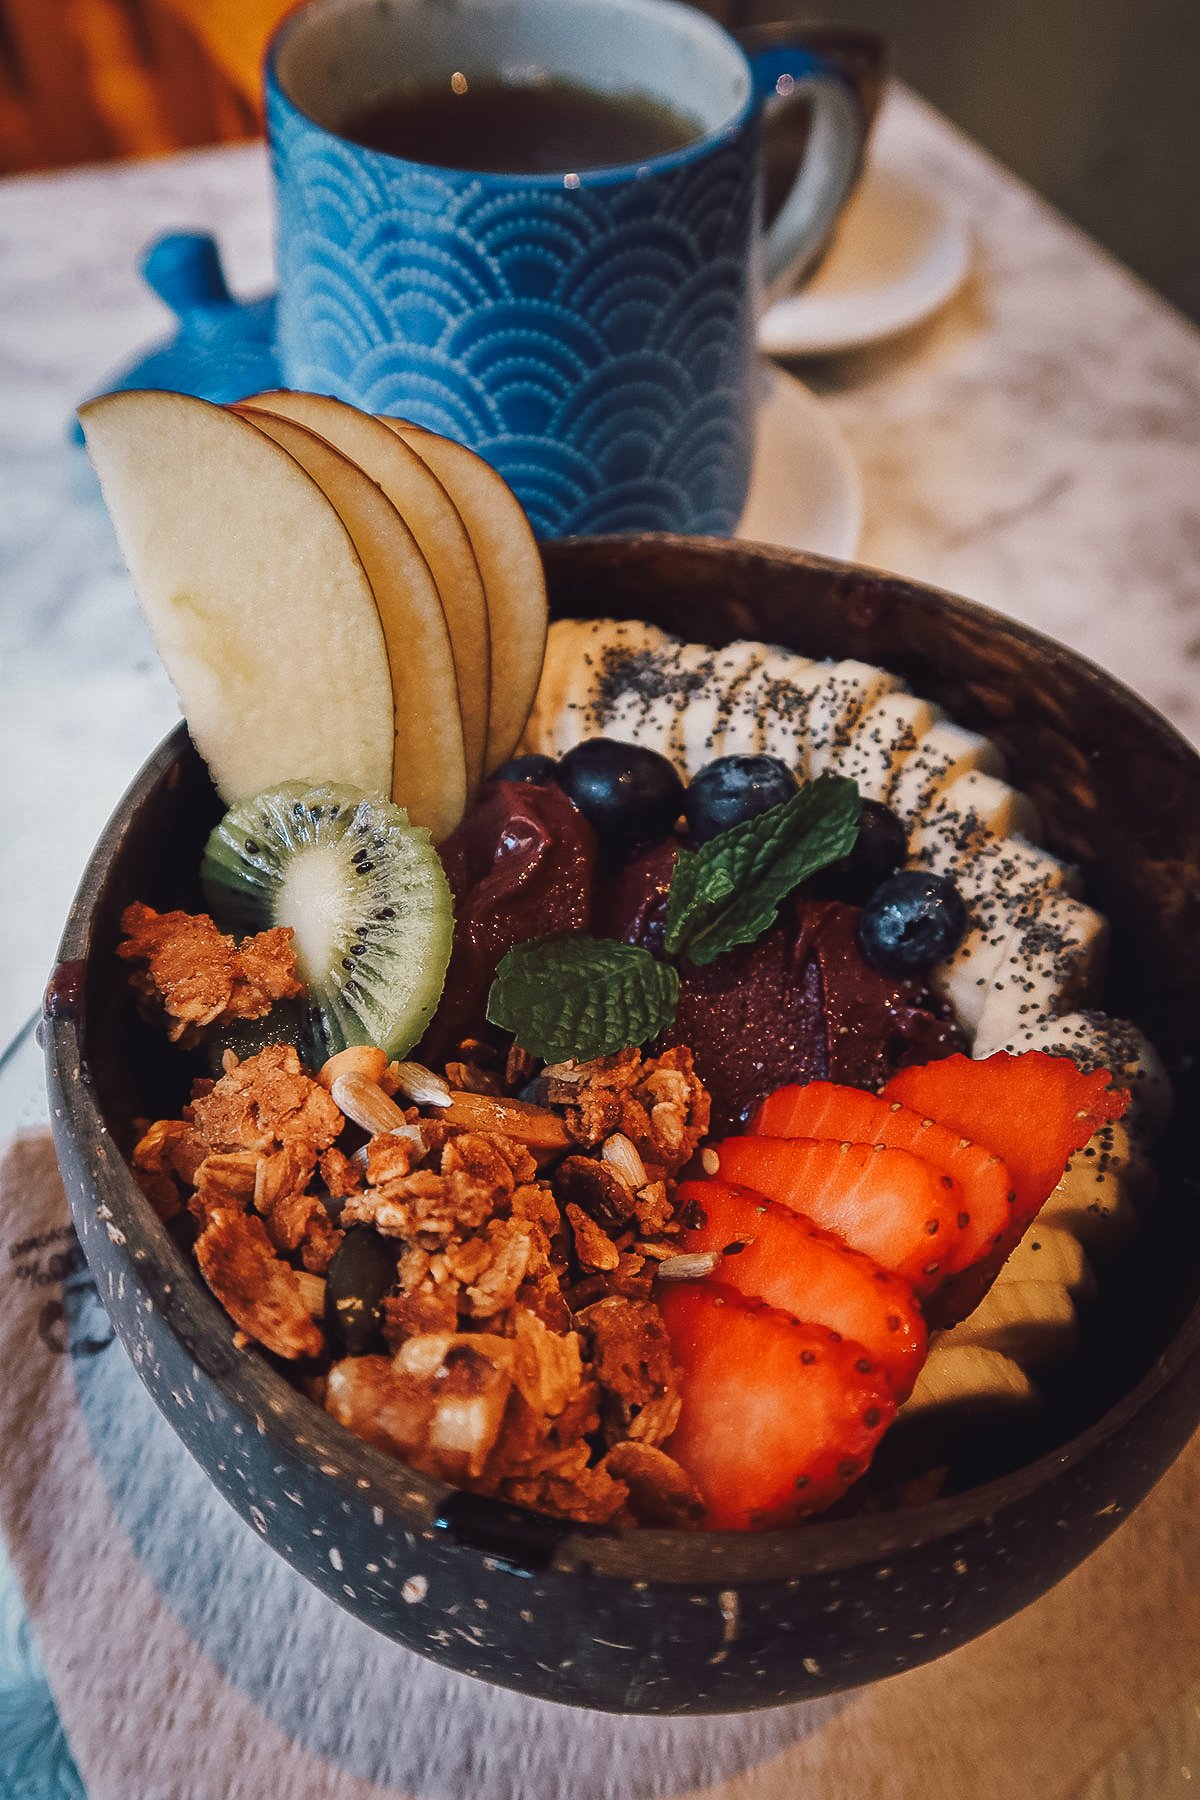 Acai bowl at a restaurant in Barcelona